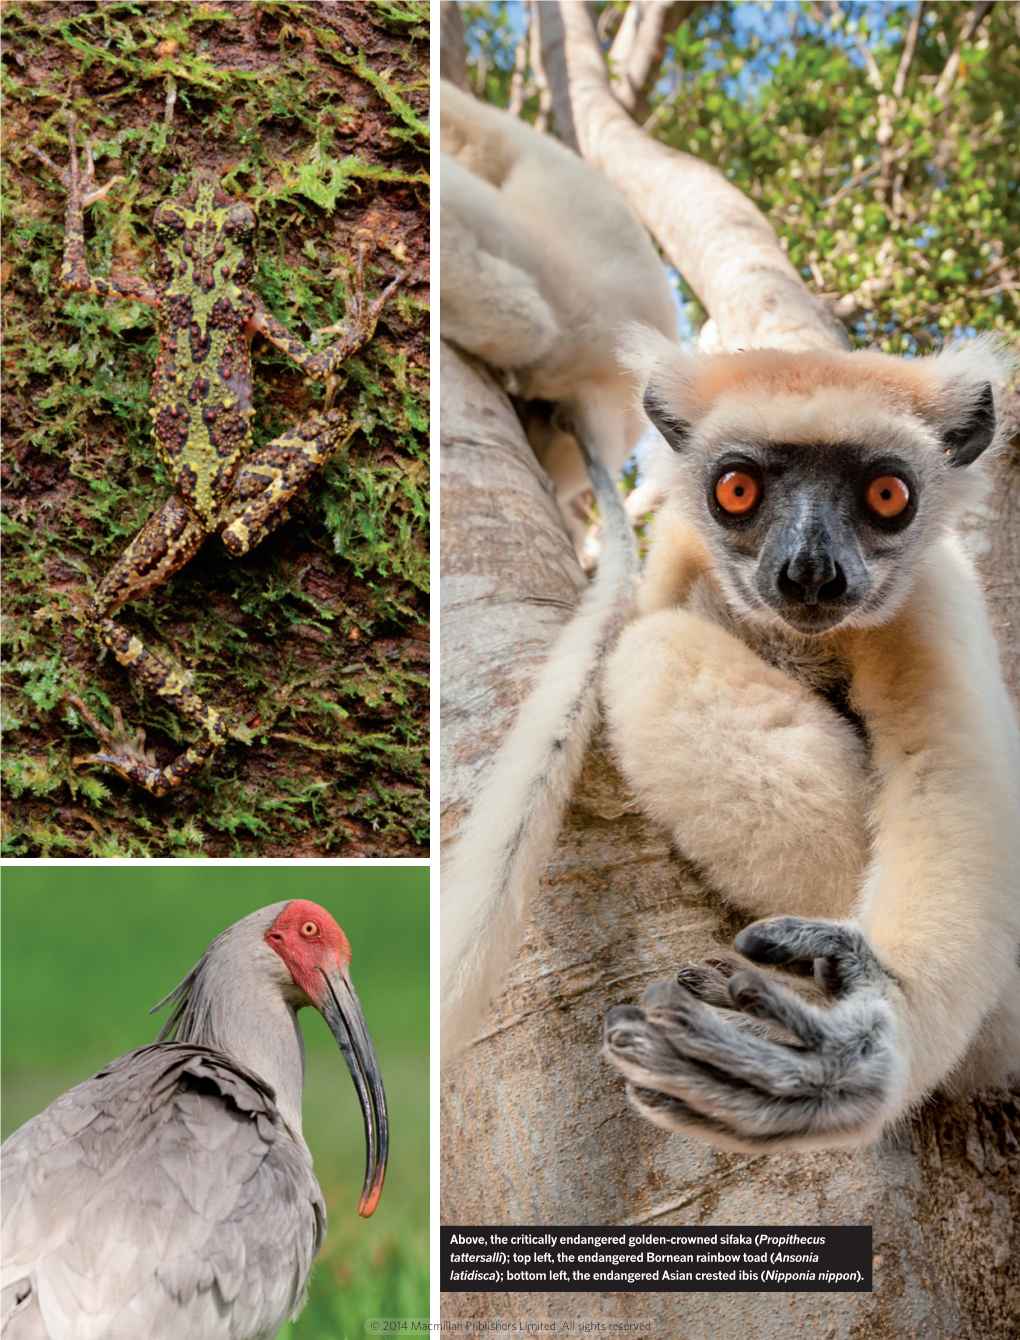 Above, the Critically Endangered Golden-Crowned Sifaka